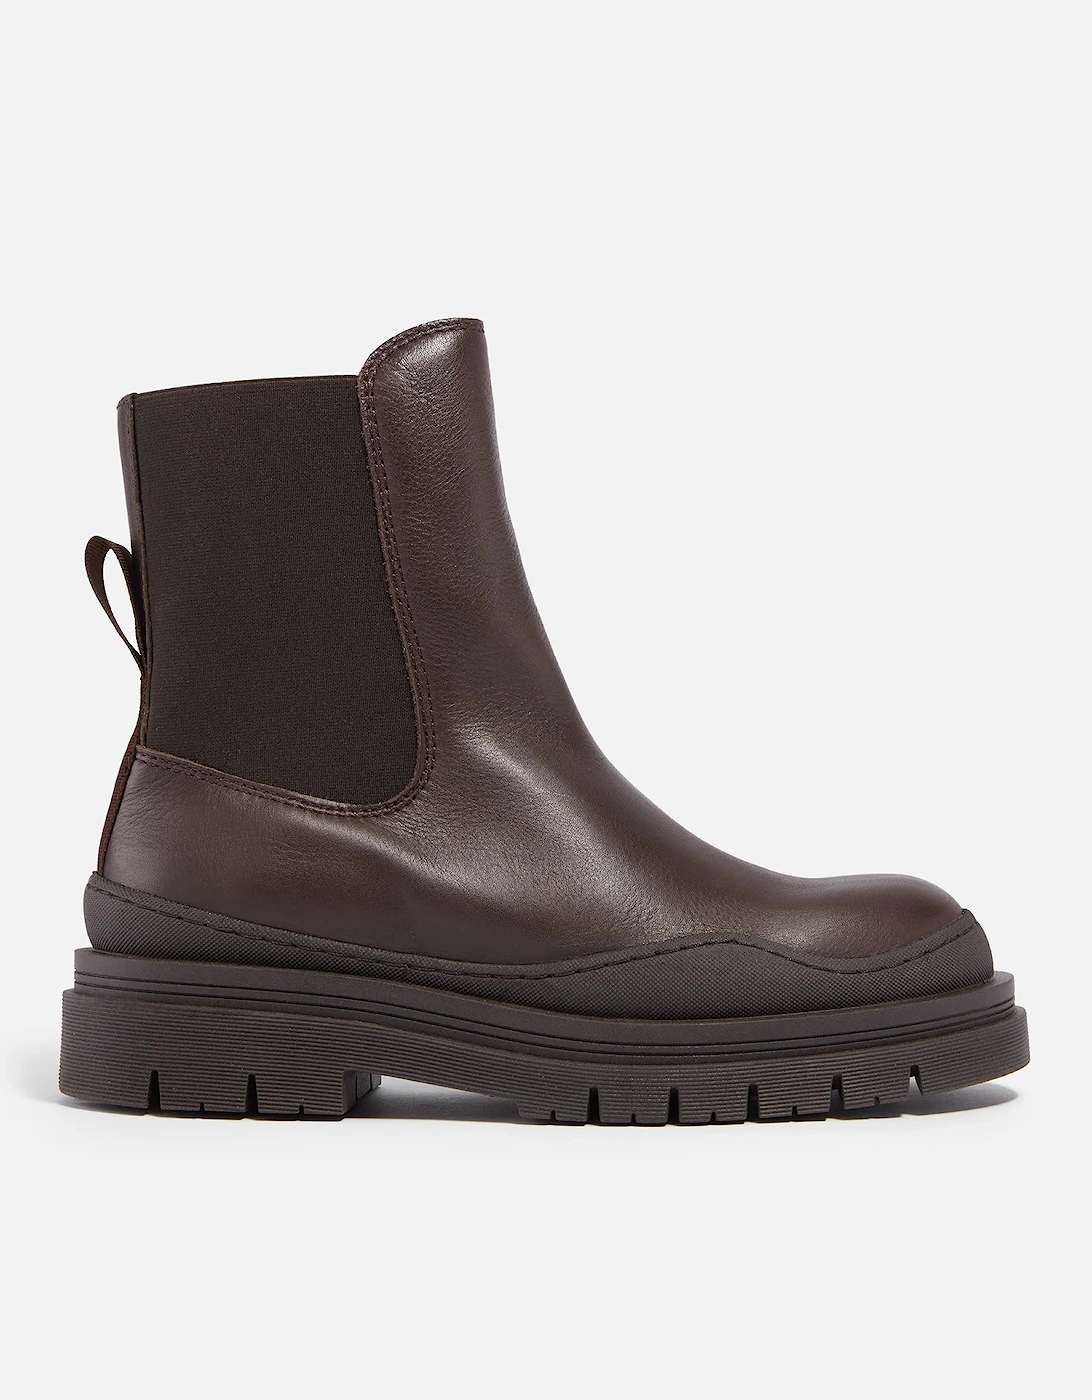 See by Chloé Alli Leather Chelsea Boots - See By Chloé - Home - Women's Shoes - Women's Boots - Women's Chelsea Boots - See by Chloé Alli Leather Chelsea Boots, 2 of 1